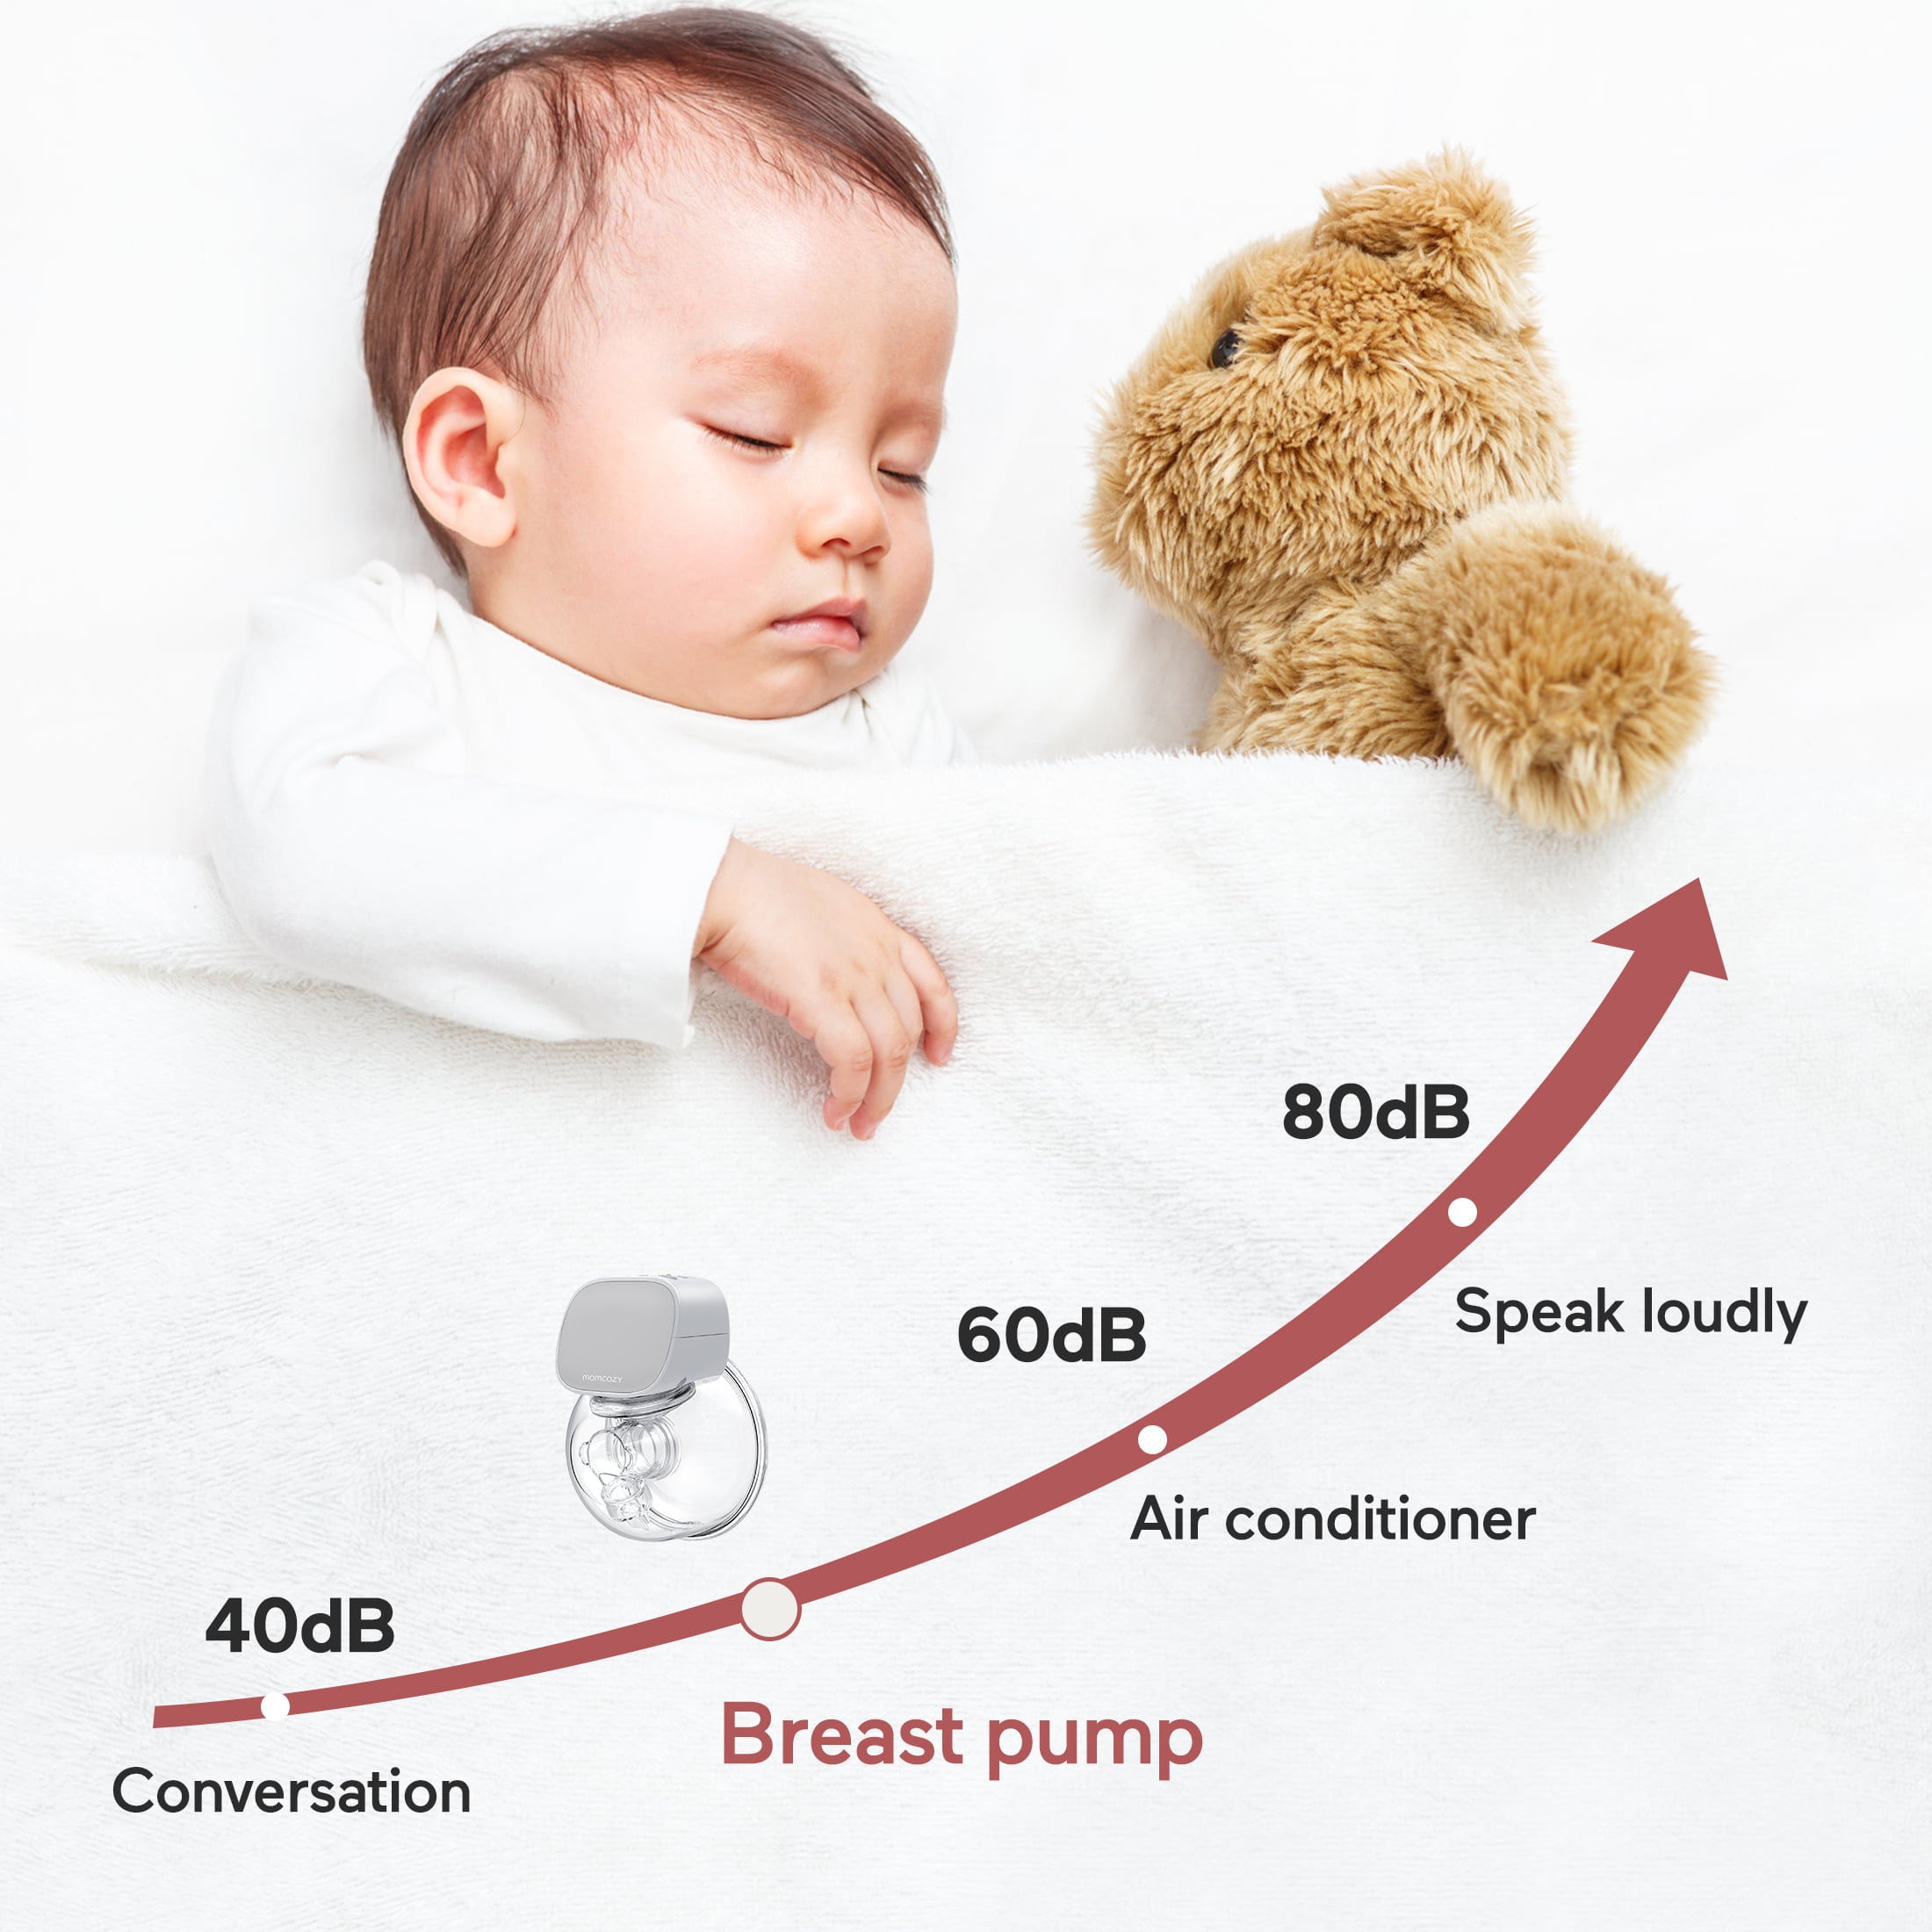 Bigbrandproducts Momcozy 11-in-1 Hands-Free Breast Pump, 24mm - White -  419 requests 2Count